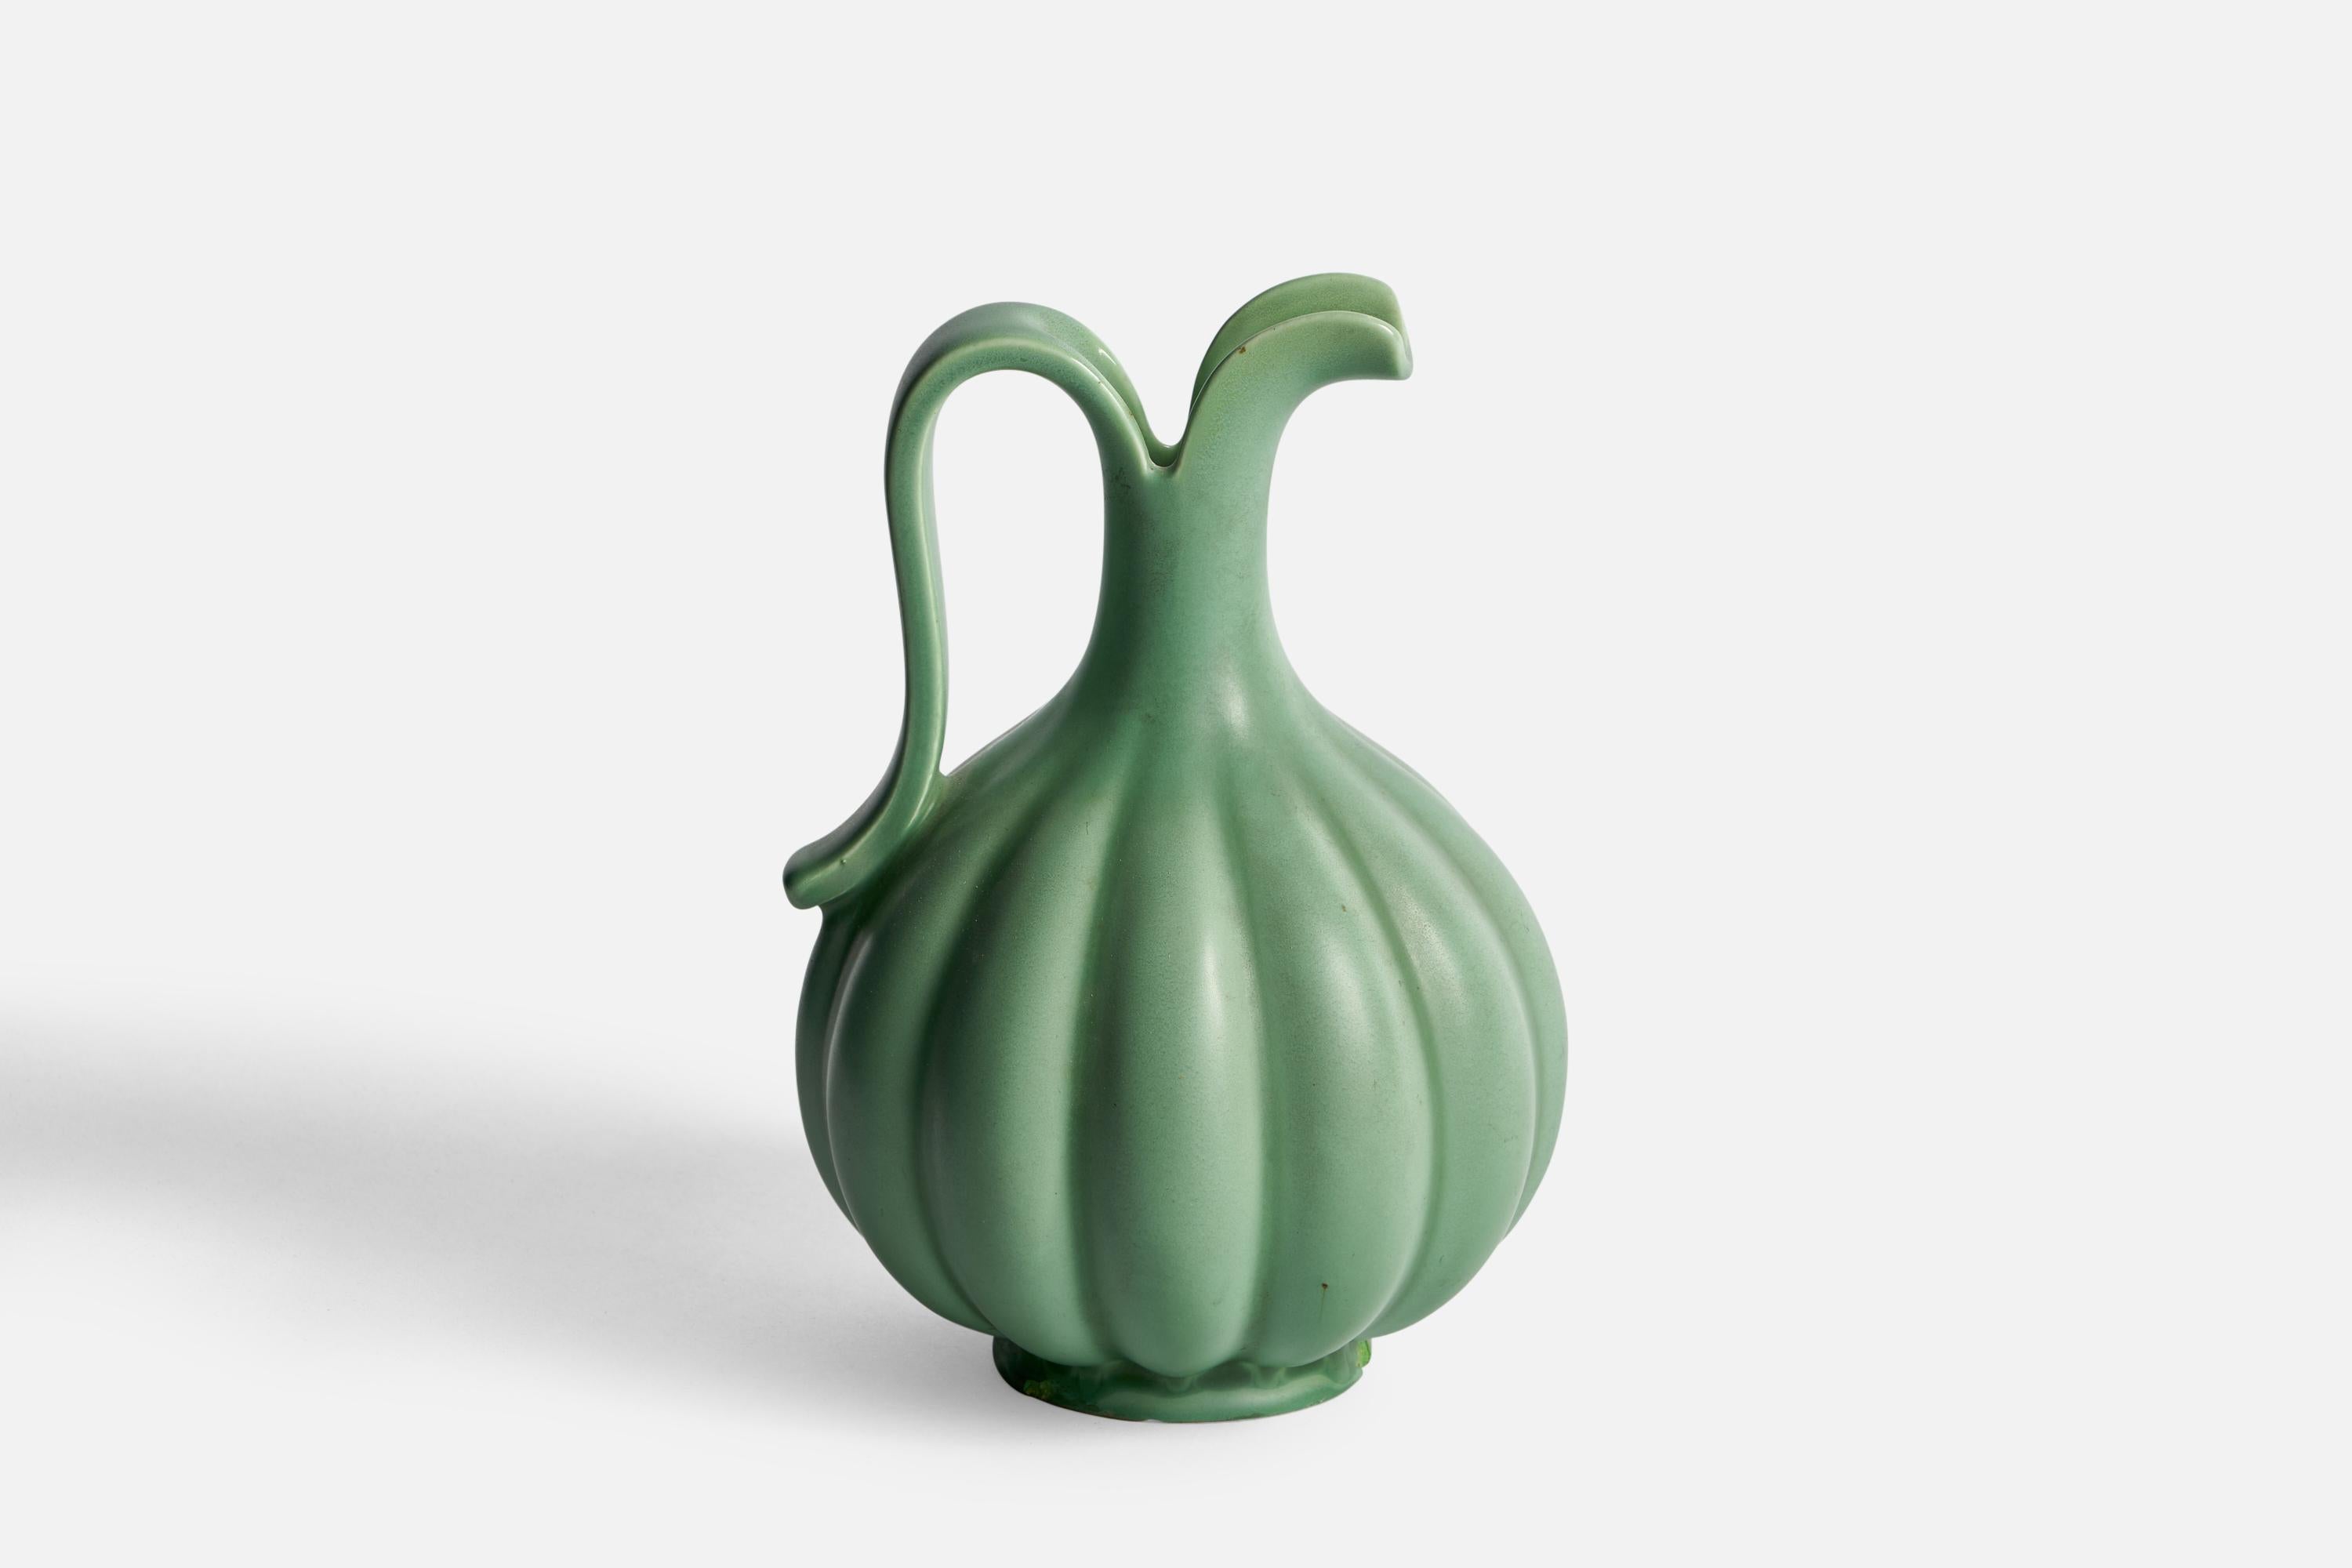 A fluted green-glazed ceramic pitcher designed by Arthur Percy and produced by Gefle, Sweden, 1930s.